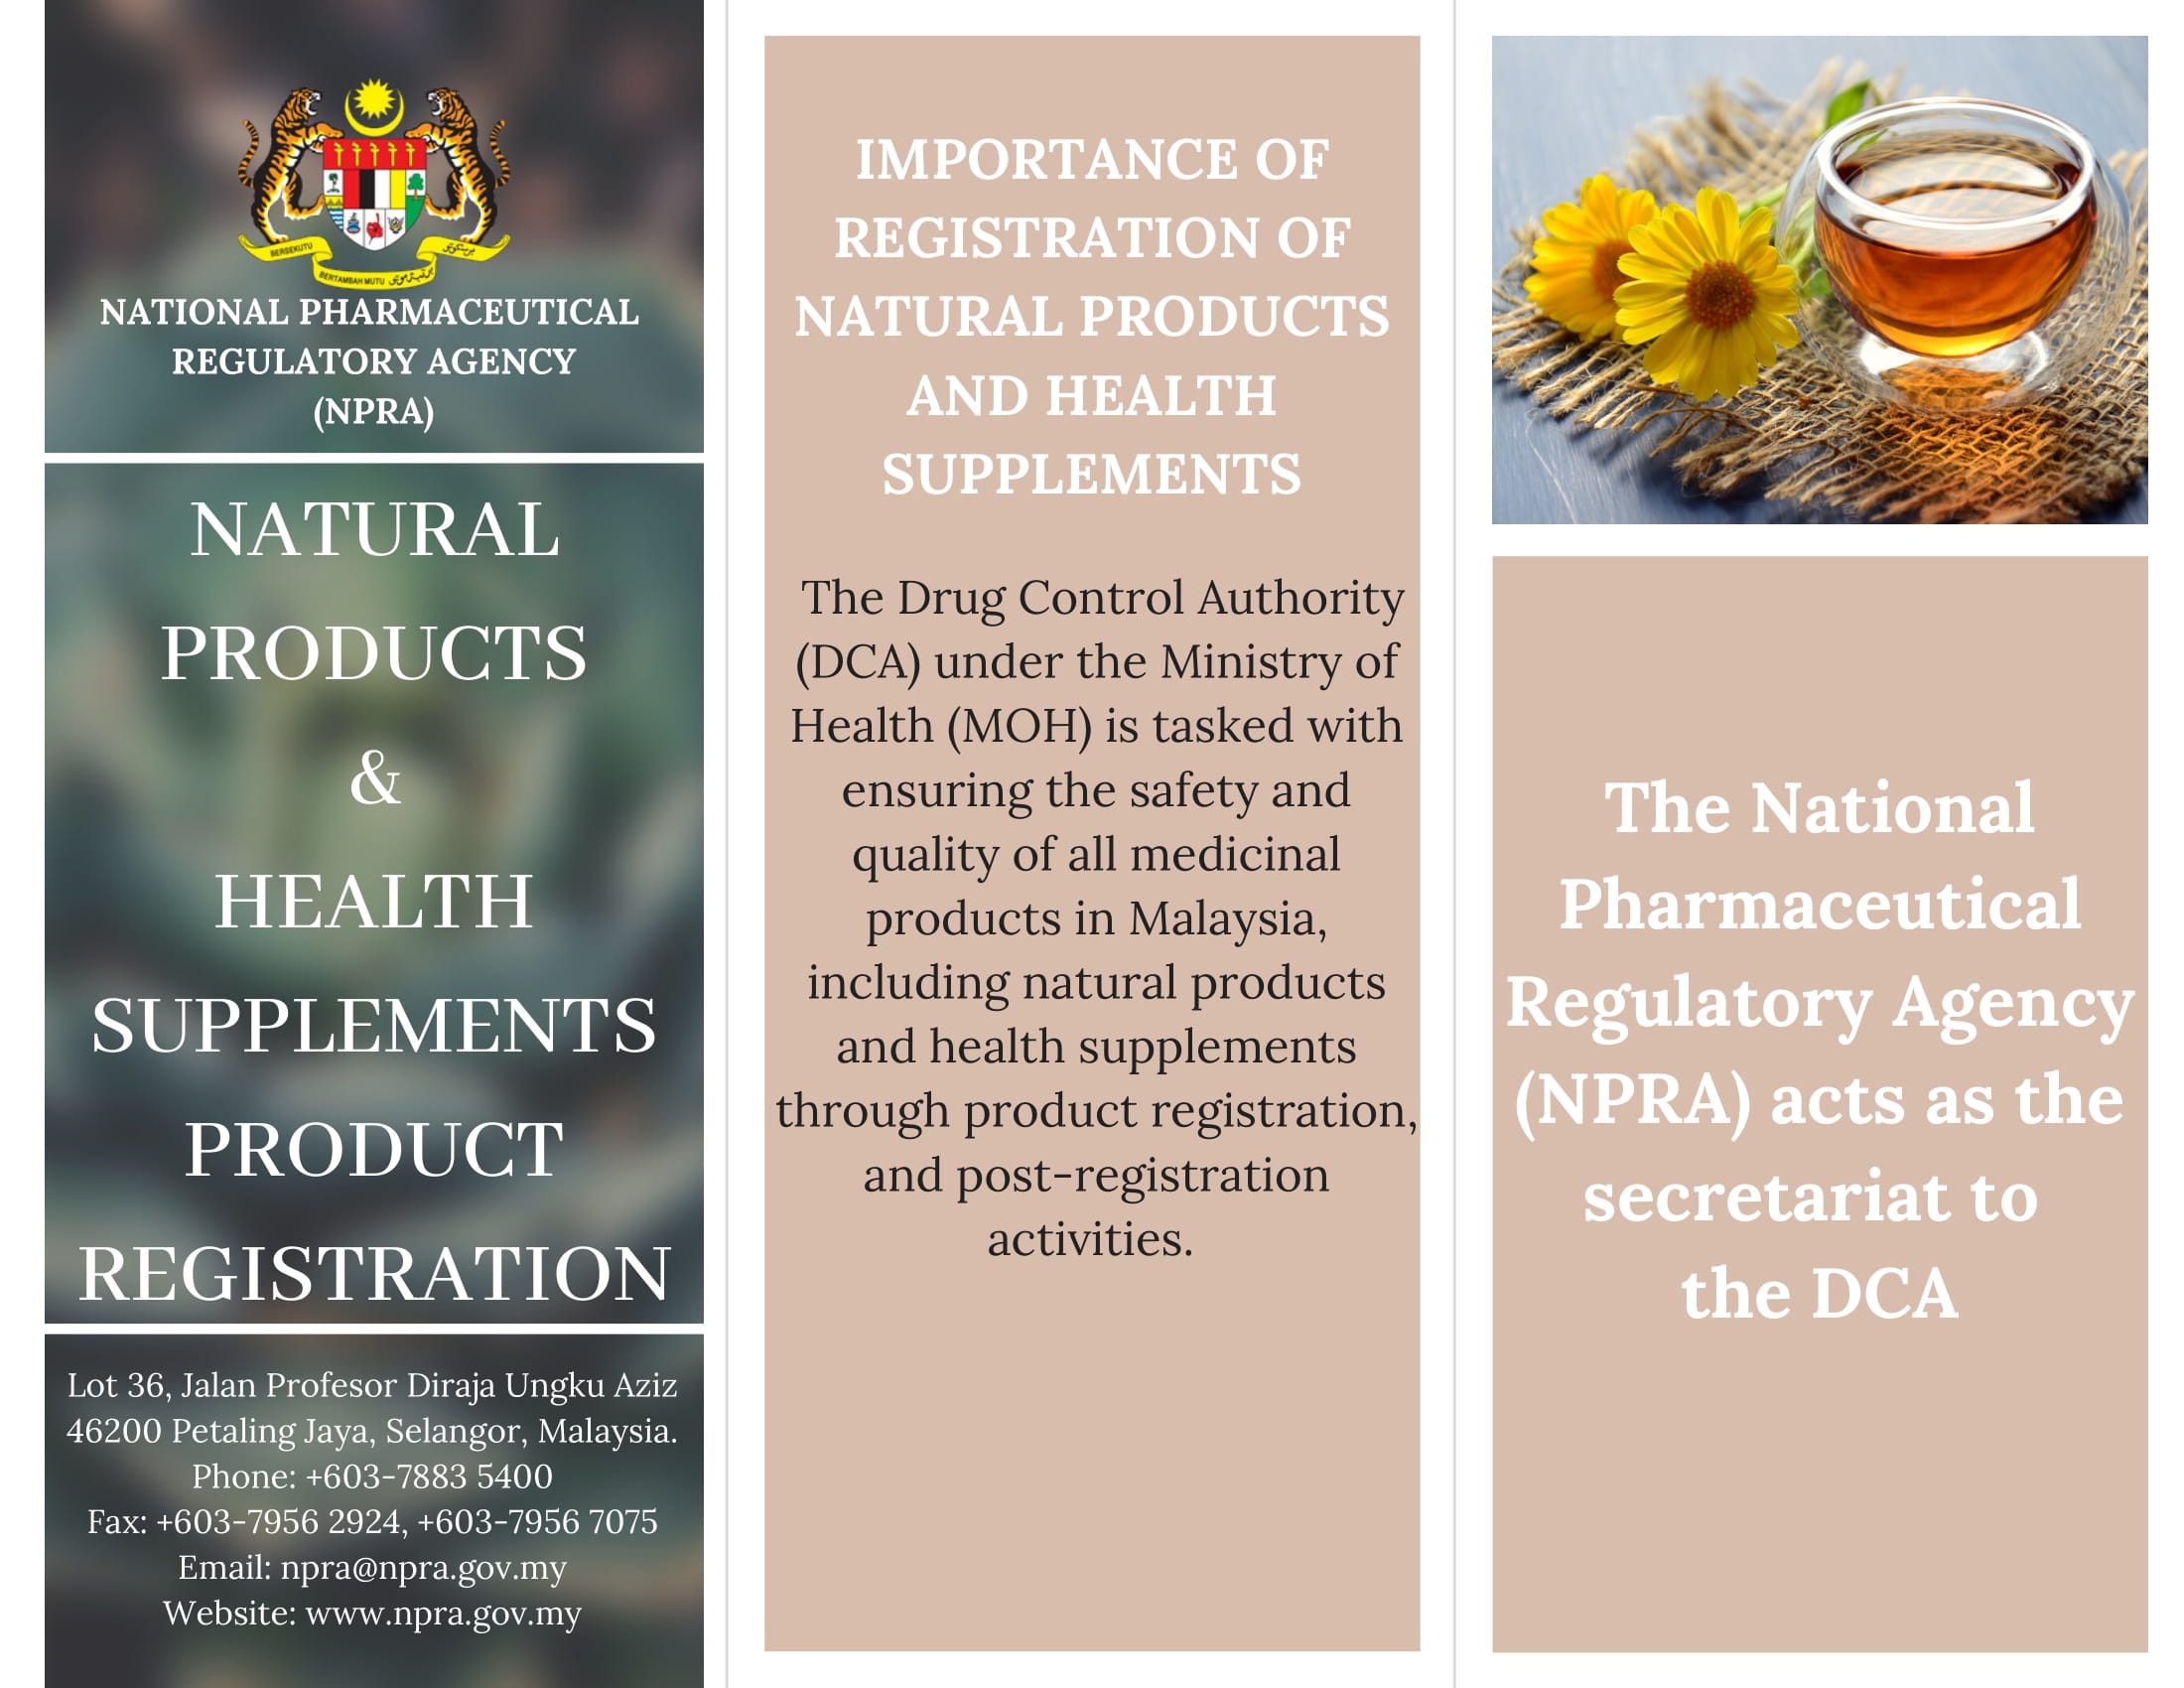 Natural Products & Health Supplements Product Registration